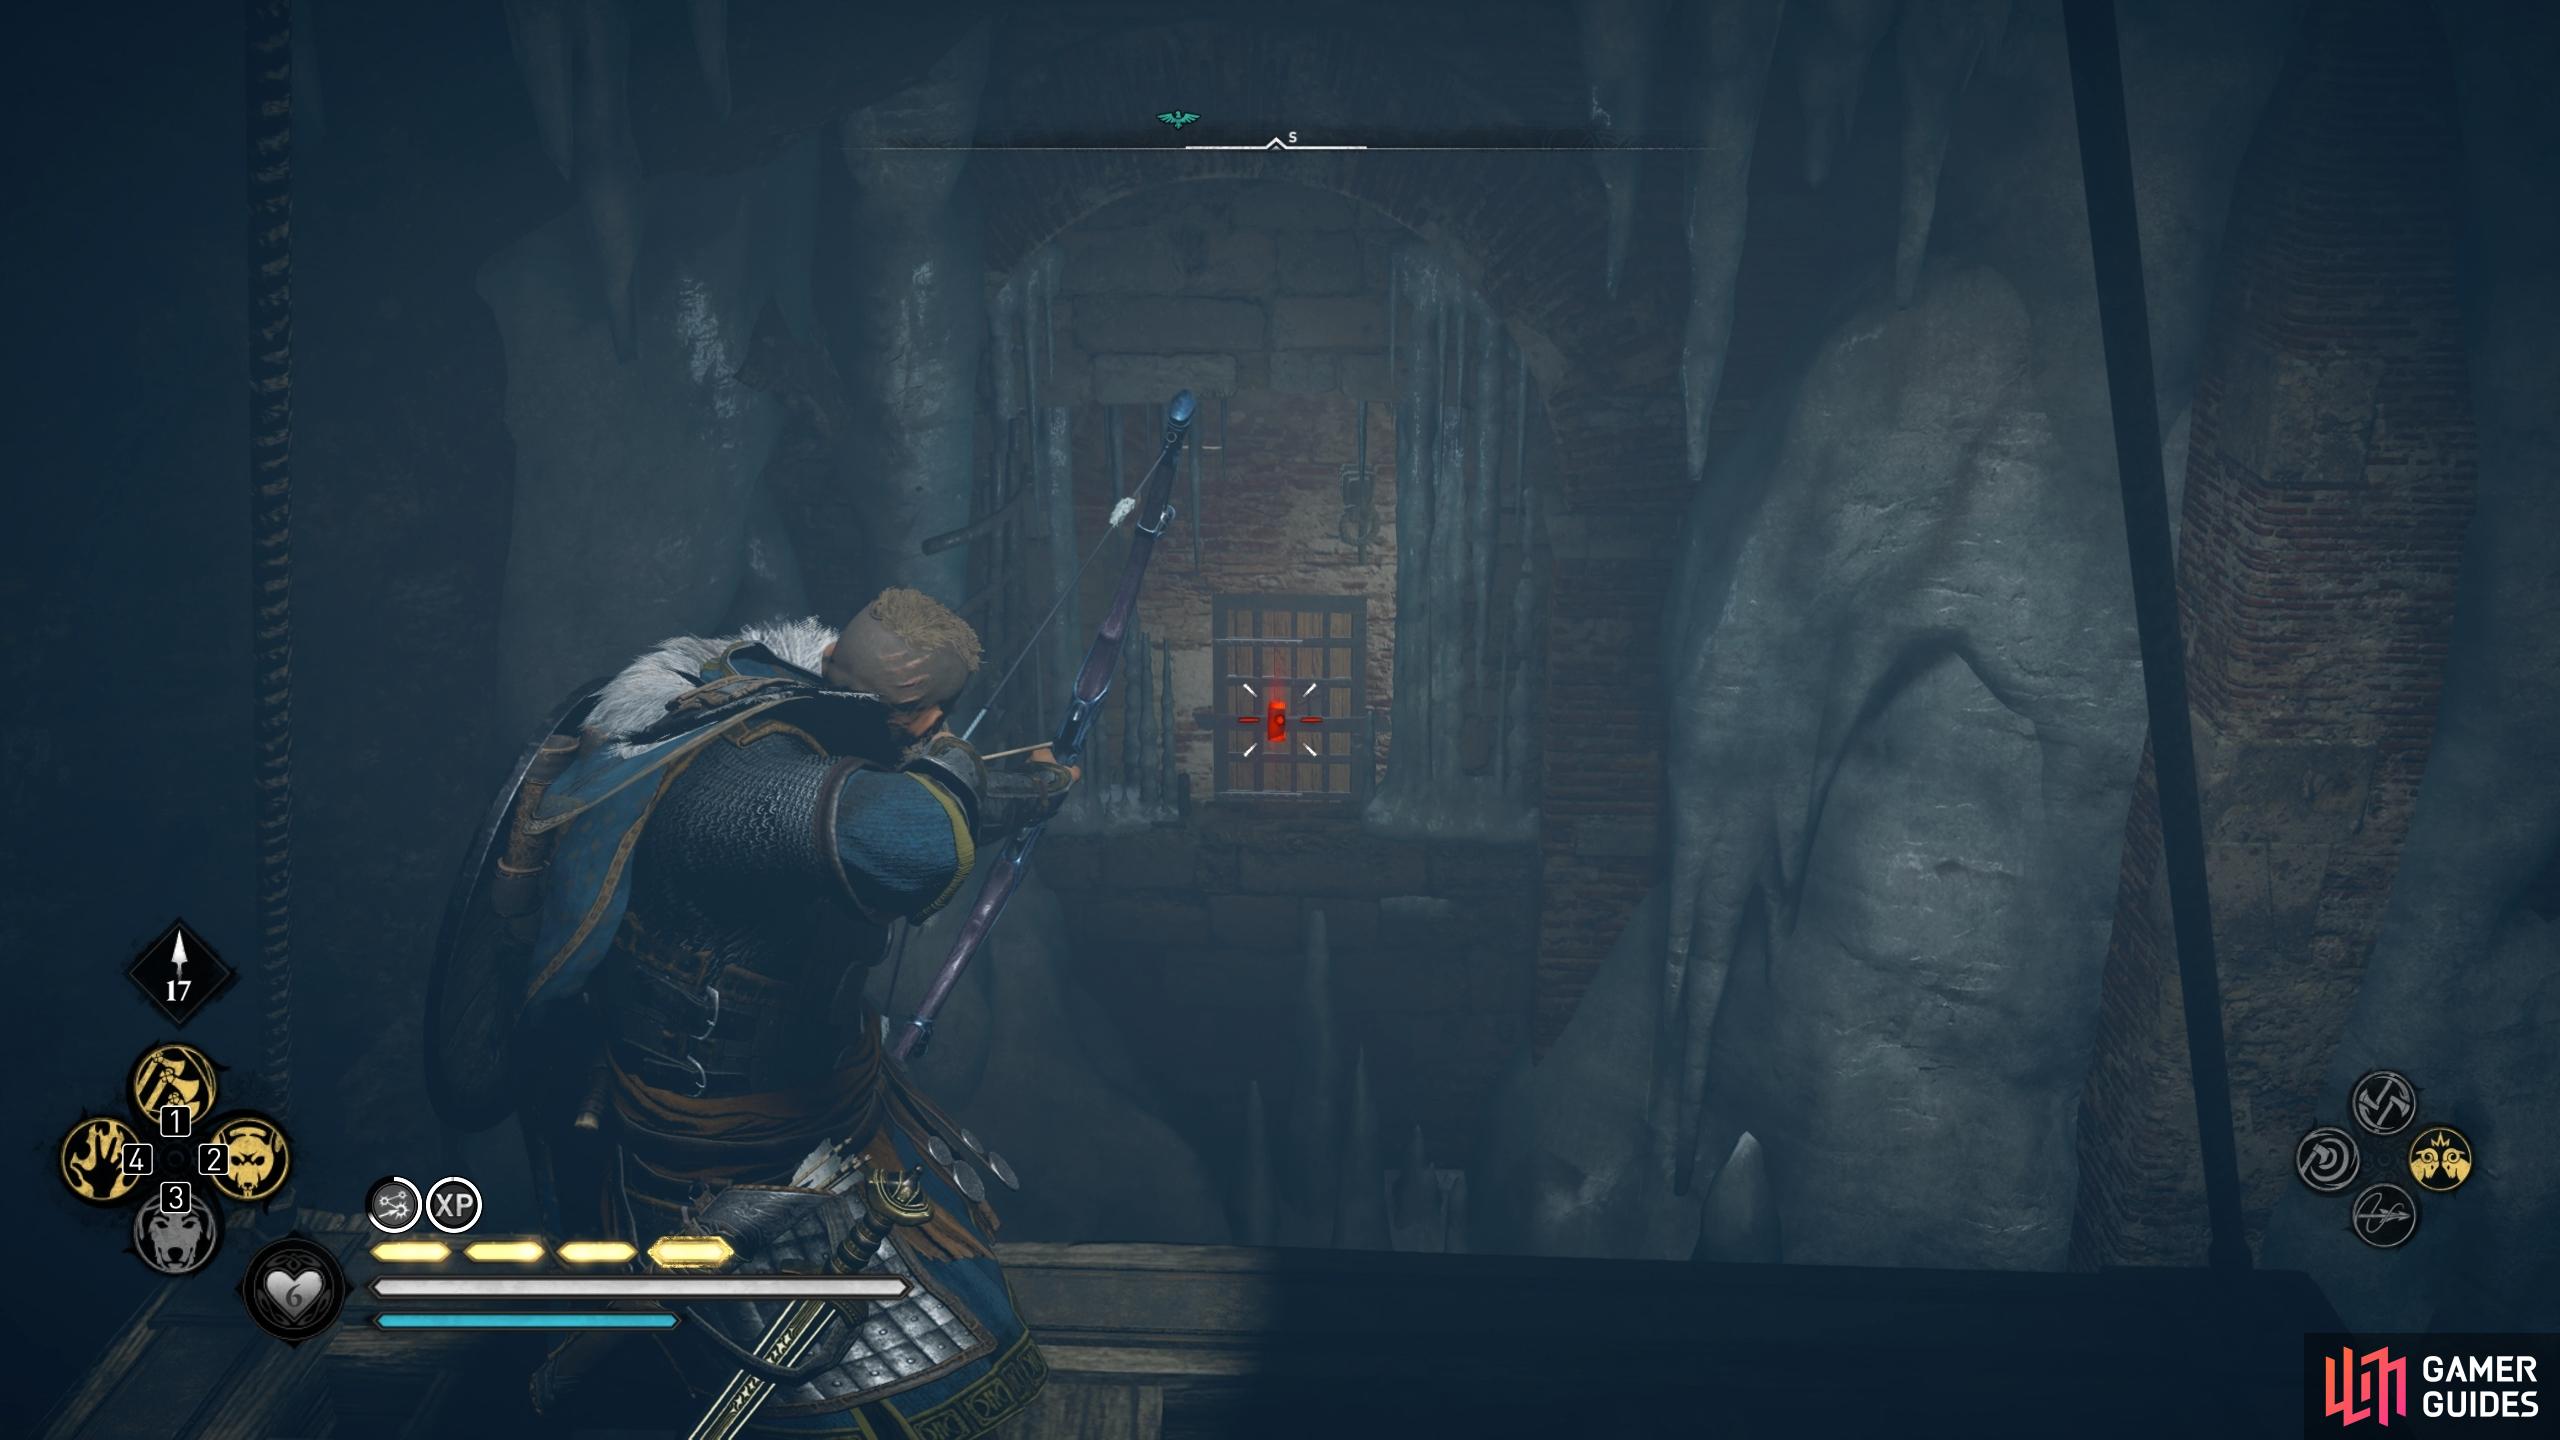 You can shoot the lock to the door from the suspended wooden platforms.